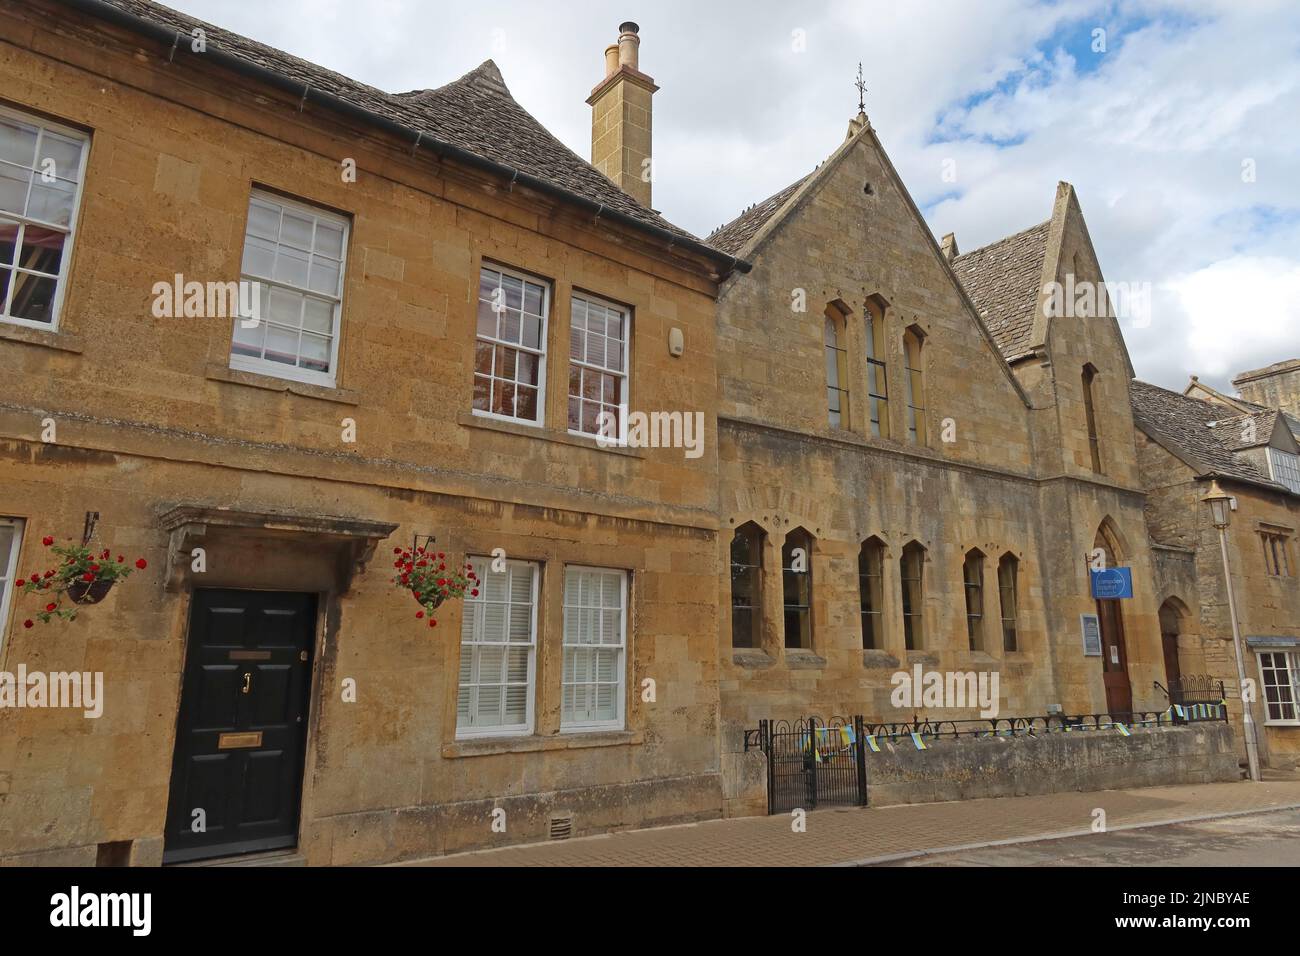 Back ends, Chipping Campden, Cotswolds, Gloucestershire, Angleterre, ROYAUME-UNI, GL55 6AT Banque D'Images